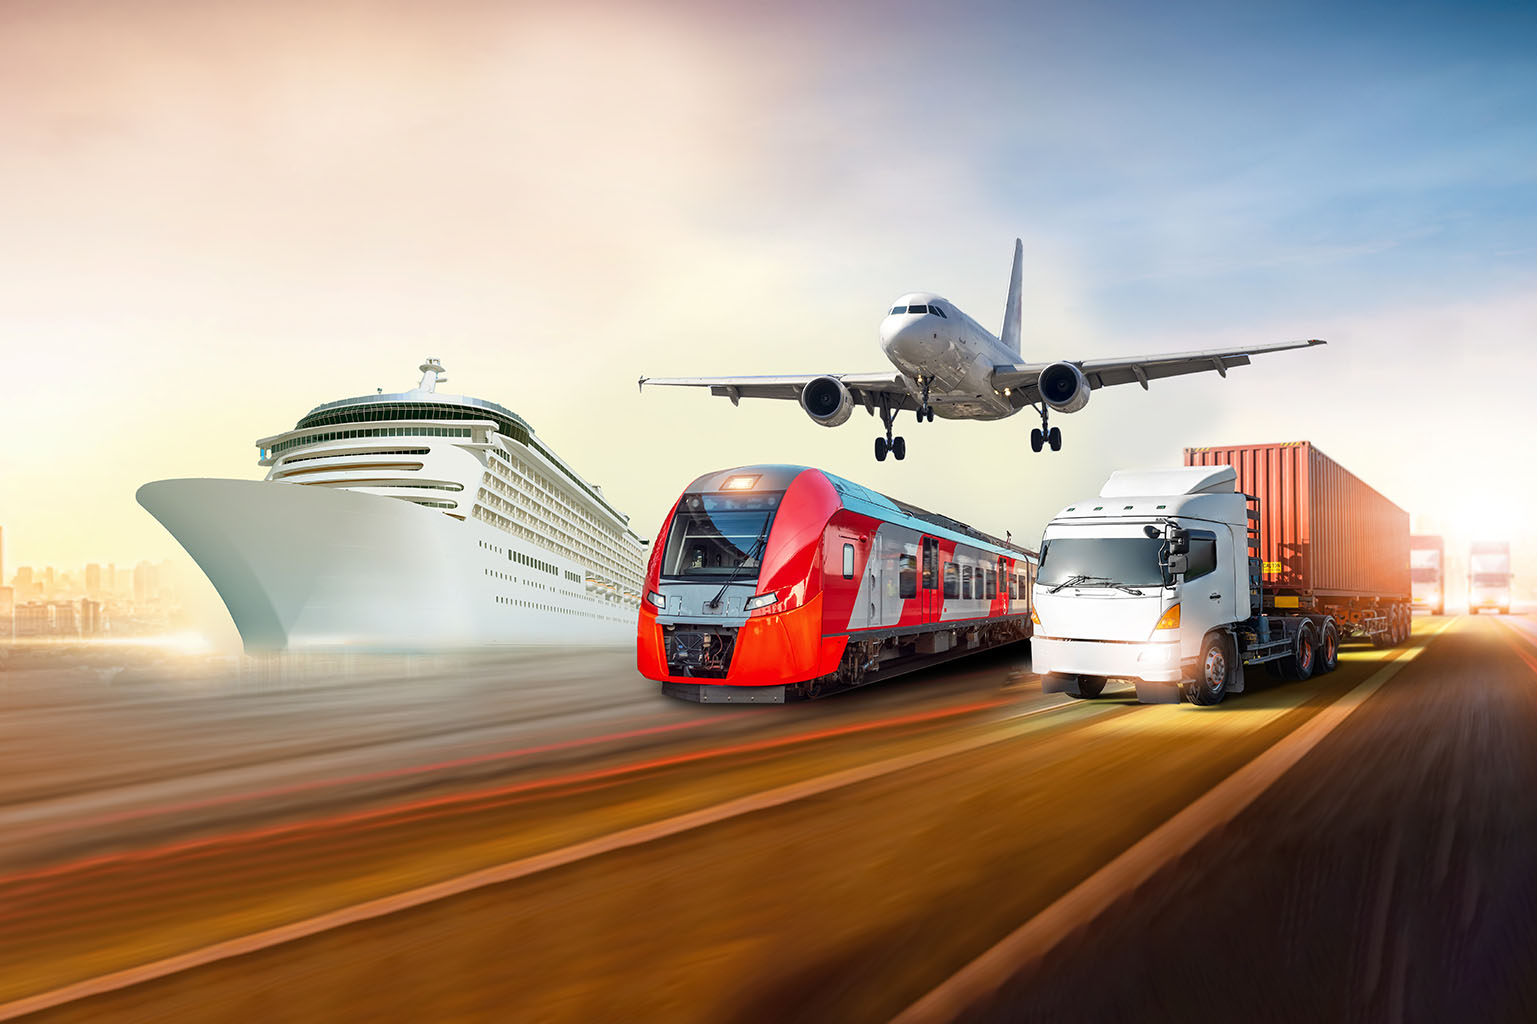 Advantages and Disadvantages of Current Modes of Transport